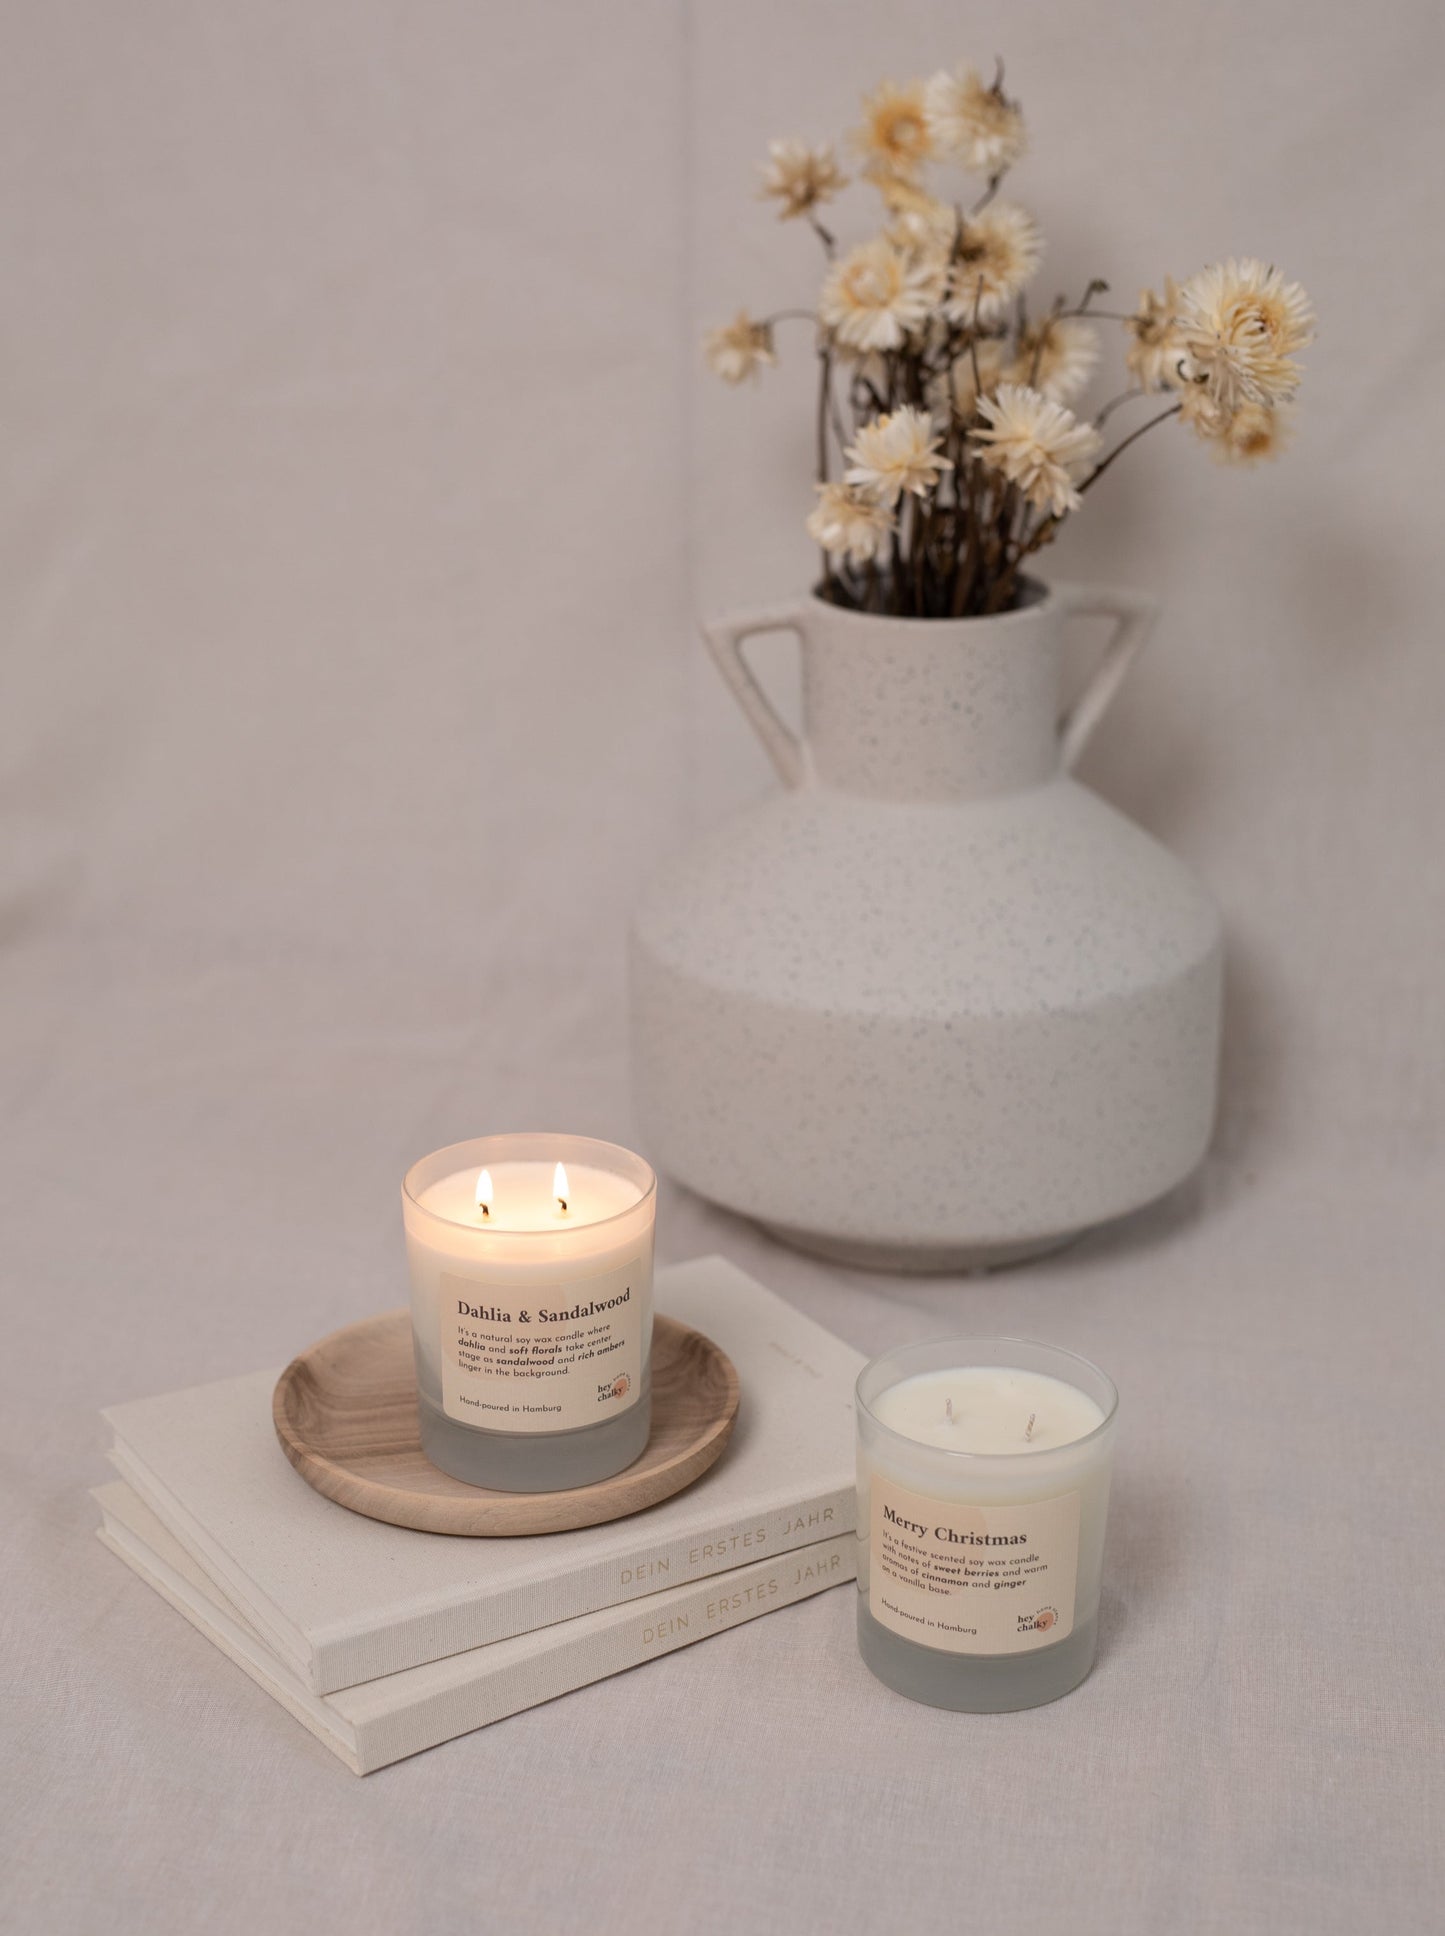 Dahlia & Sandalwood scented Candle DOUBLE WICK